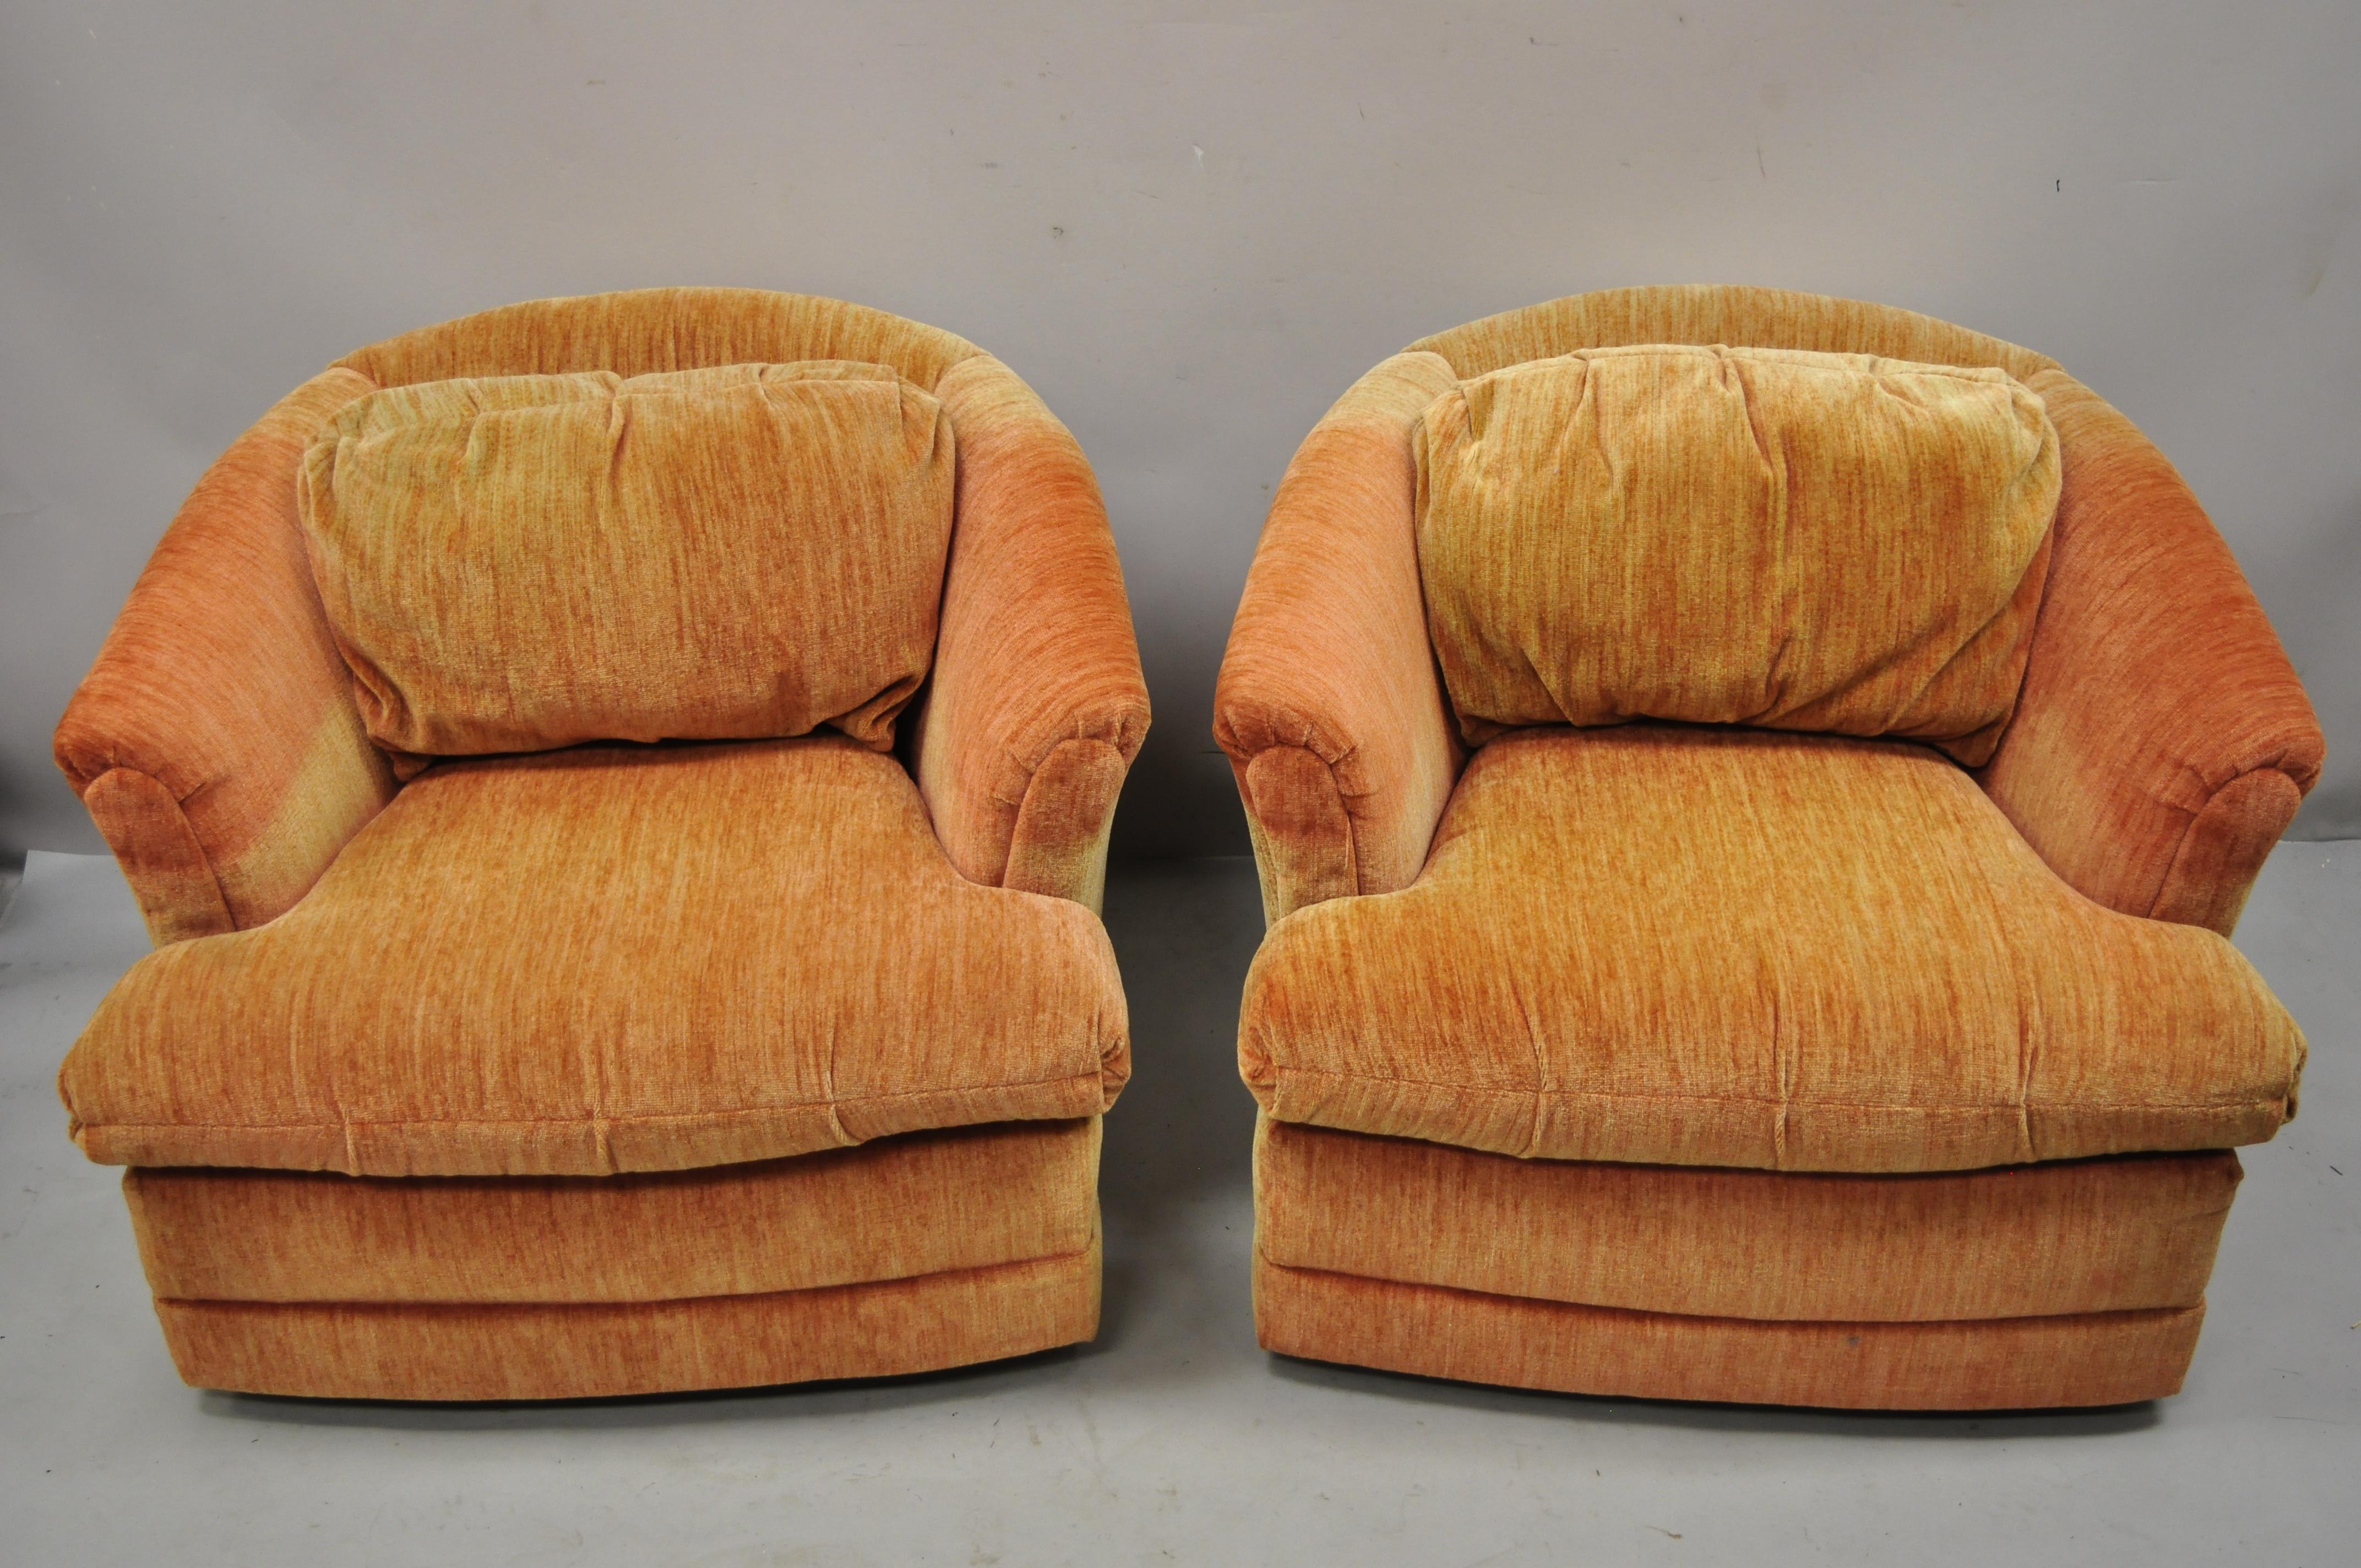 Vintage Flexsteel Mid-Century Modern orange upholstered swivel lounge club chairs - a pair. Item features swivel base, fully upholstered frame, original label, very nice vintage pair, clean modernist lines, quality American craftsmanship. Circa